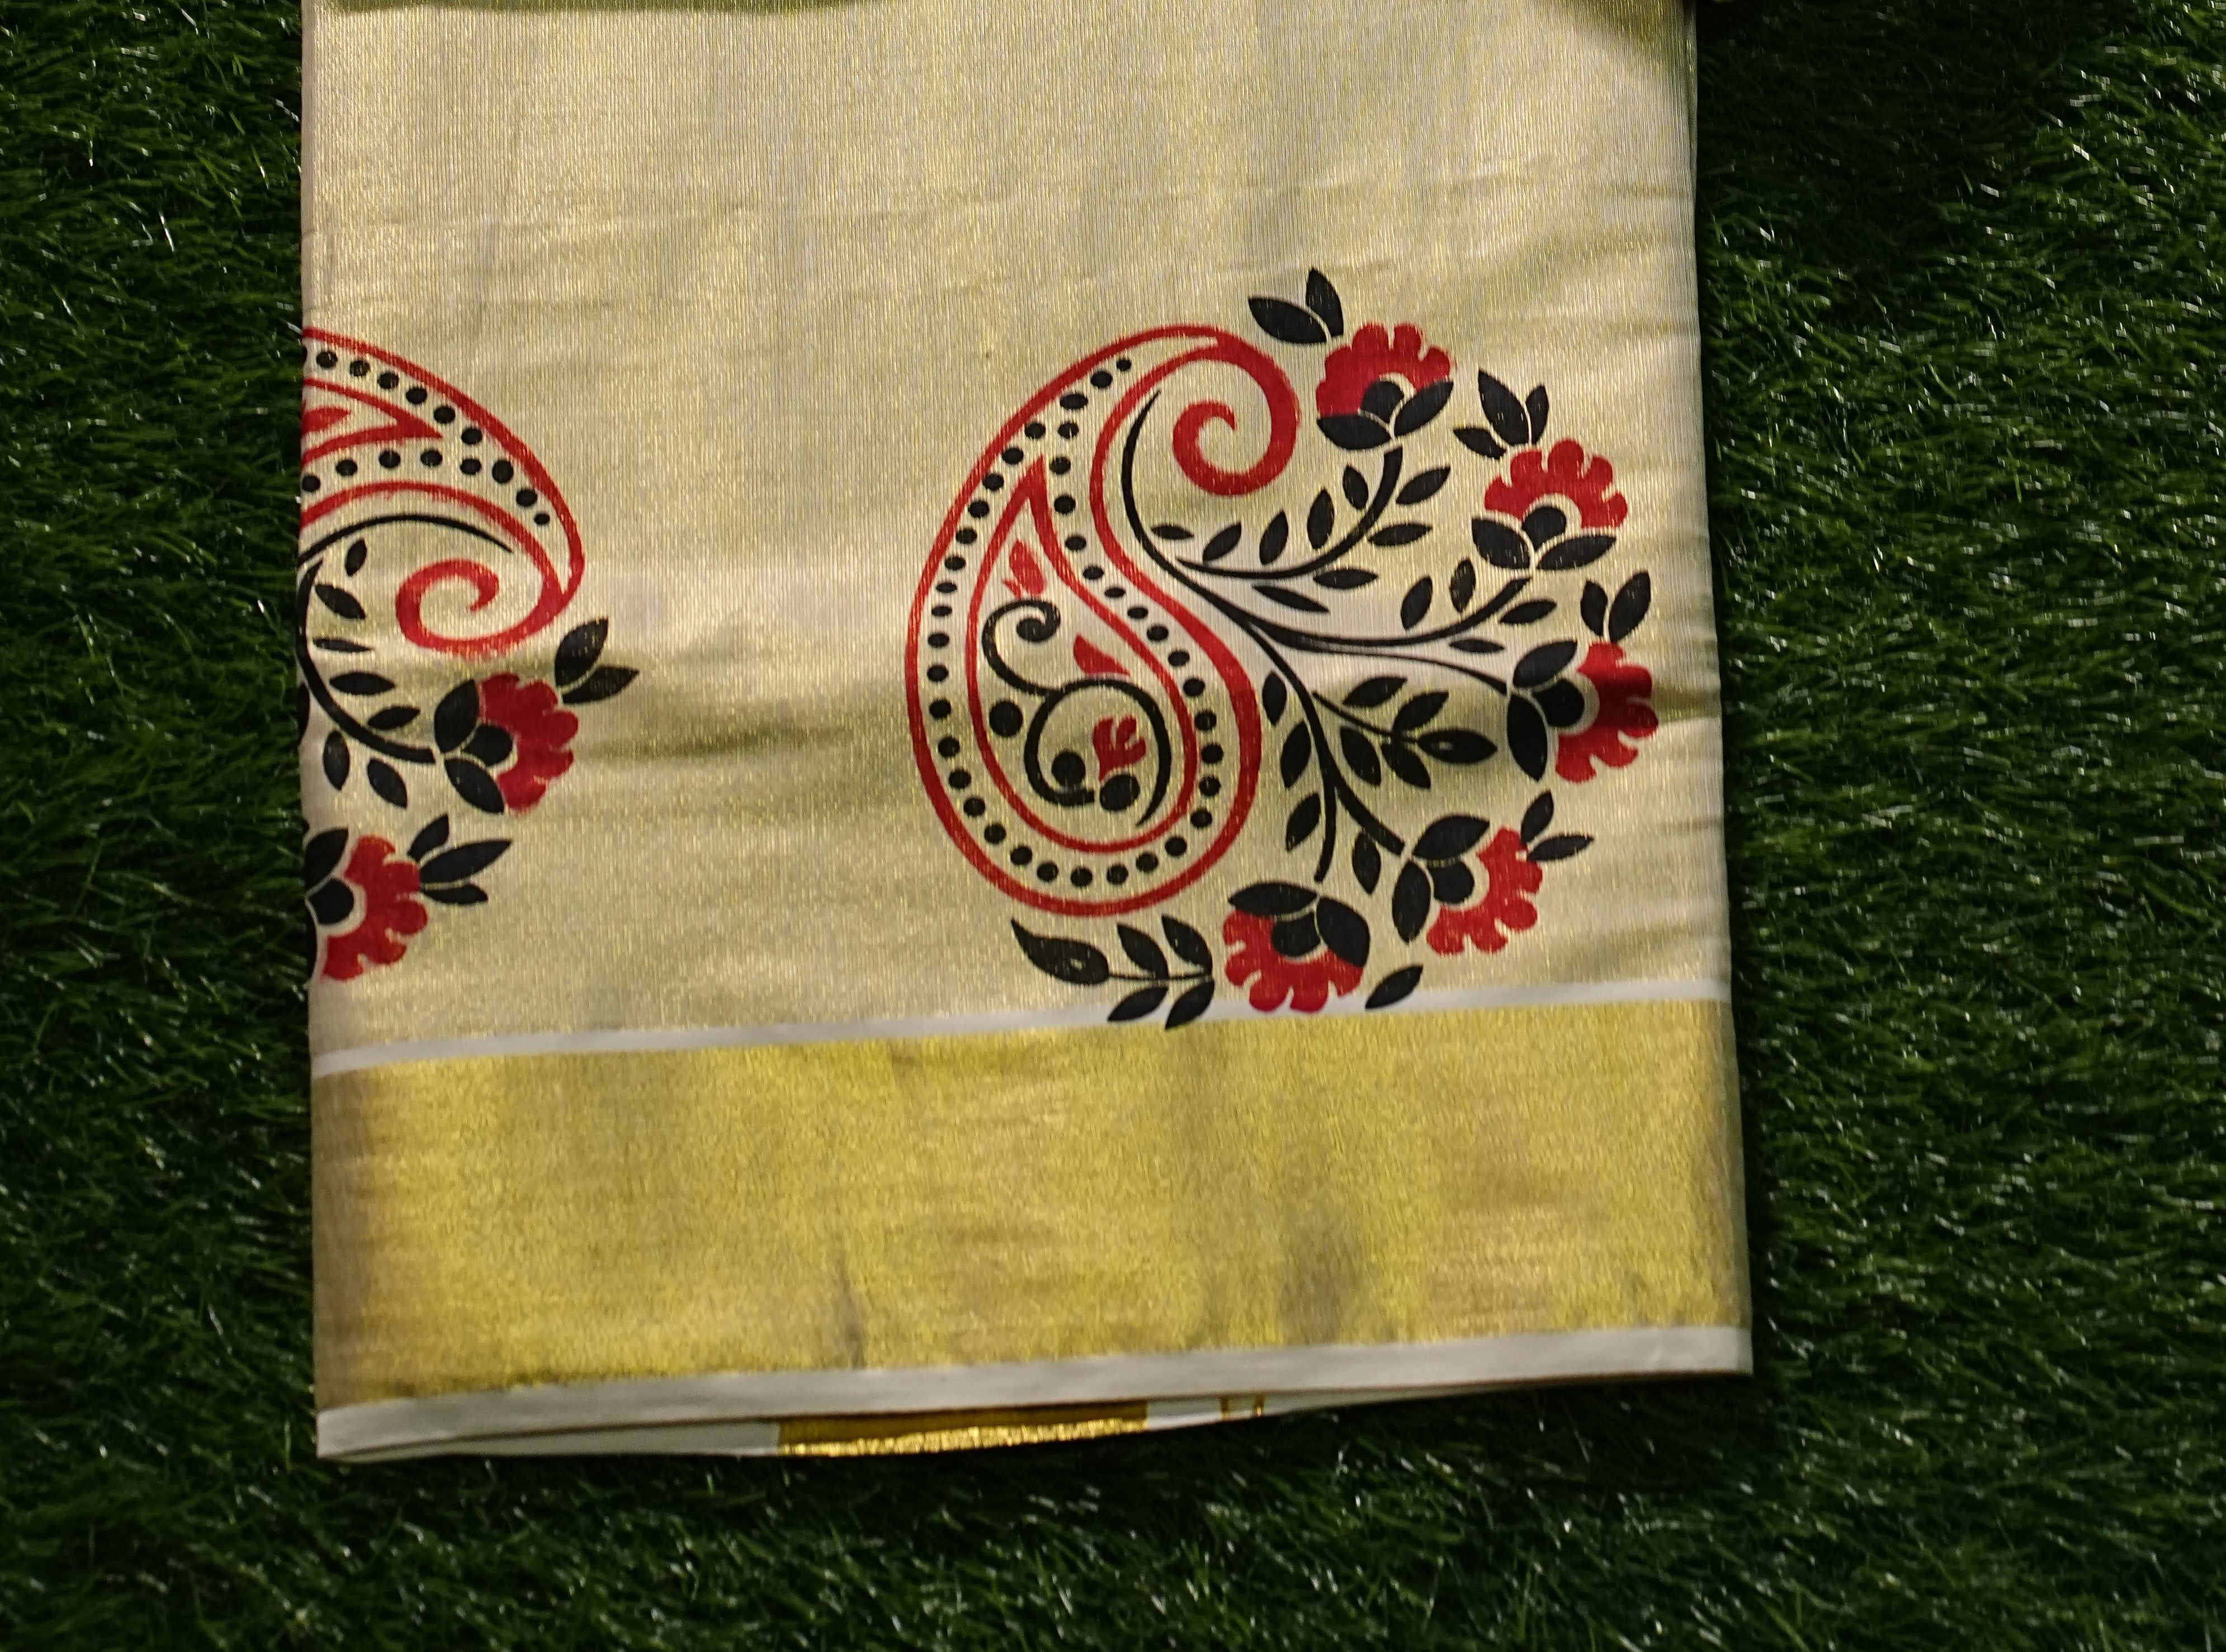 Tissue Set saree with Mango and Floral Design- 2453